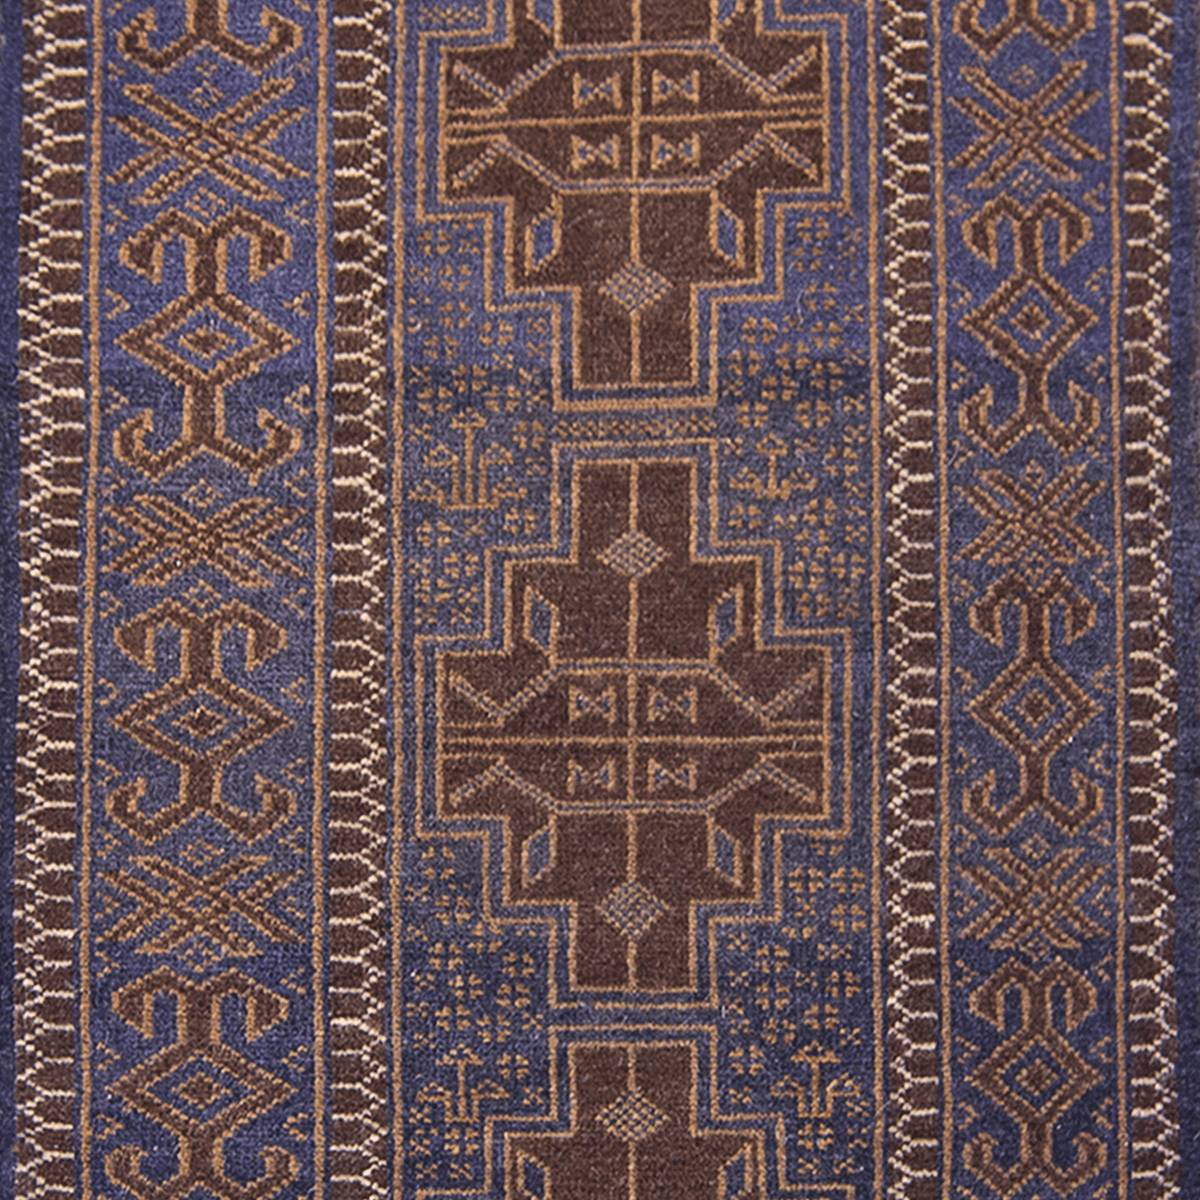 Hand-knotted 100% Wool Baluchi Small Rug 70cm x 143cm